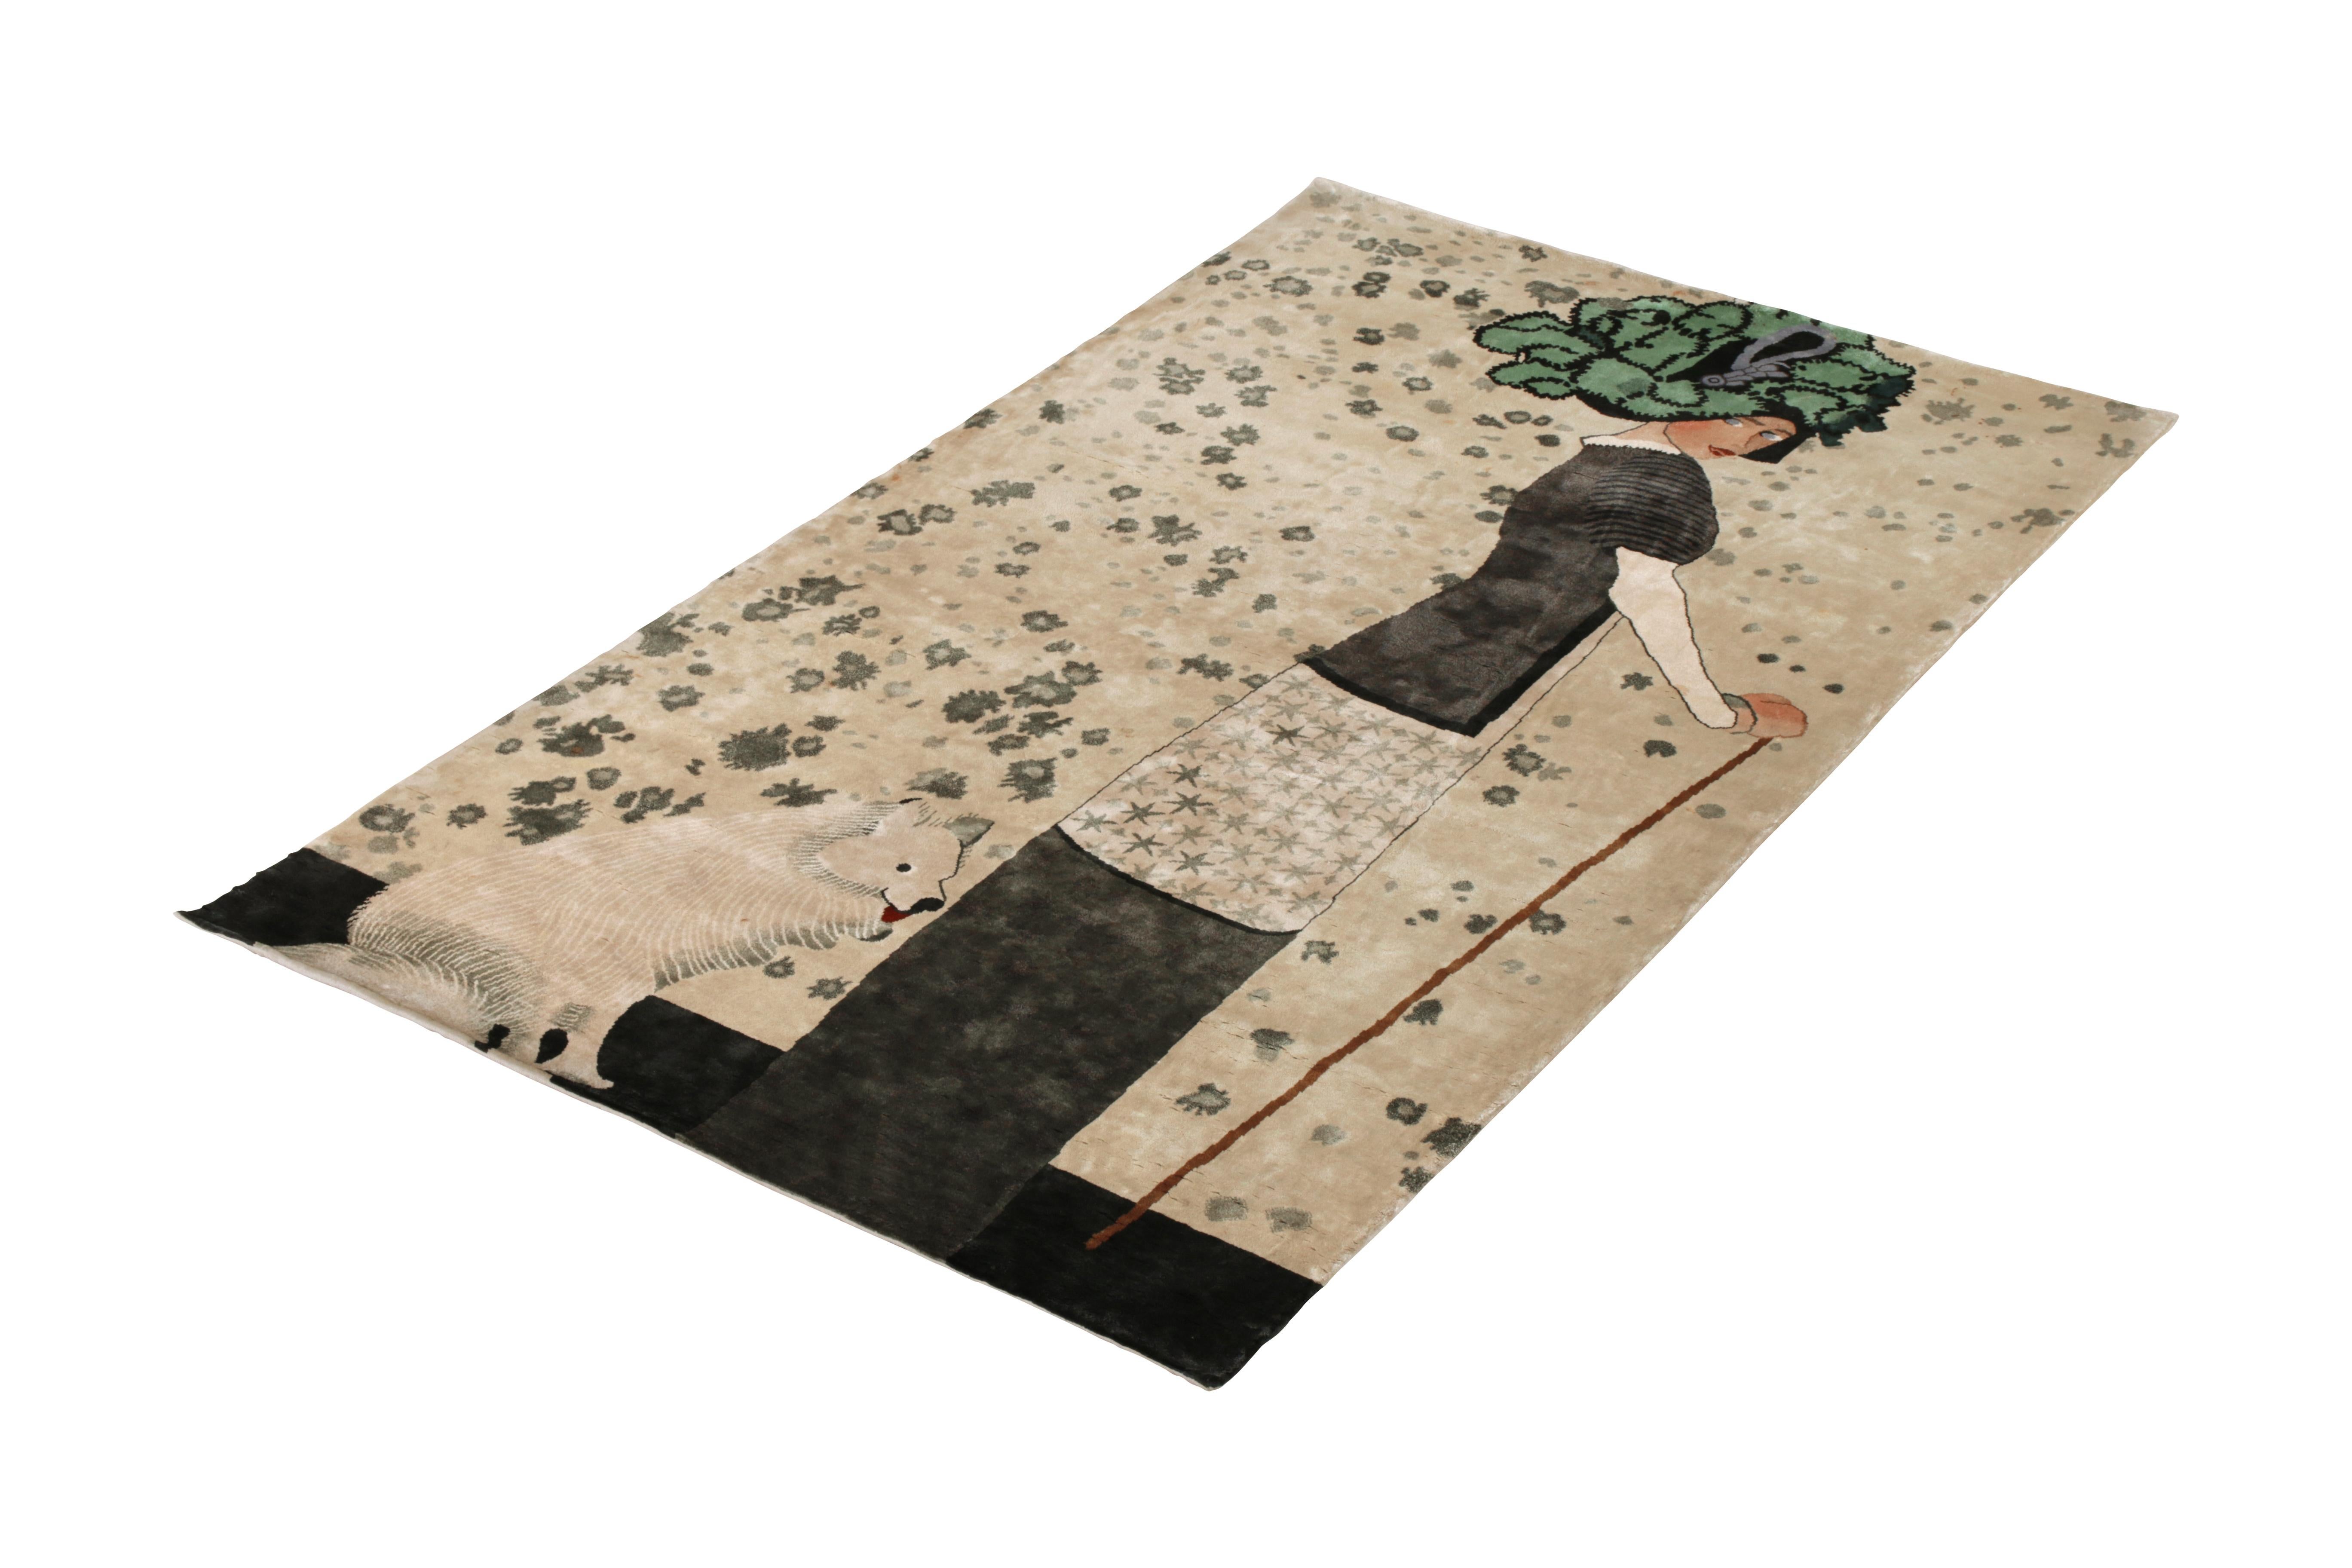 Hand-knotted in a luminous silk originating circa 1980, this 4x7 vintage rug is a collectible piece, among the first of Josh Nazmiyal’s classic productions inspired by an Art Deco rug style depicting this rare pictorial. 

On the Design: The